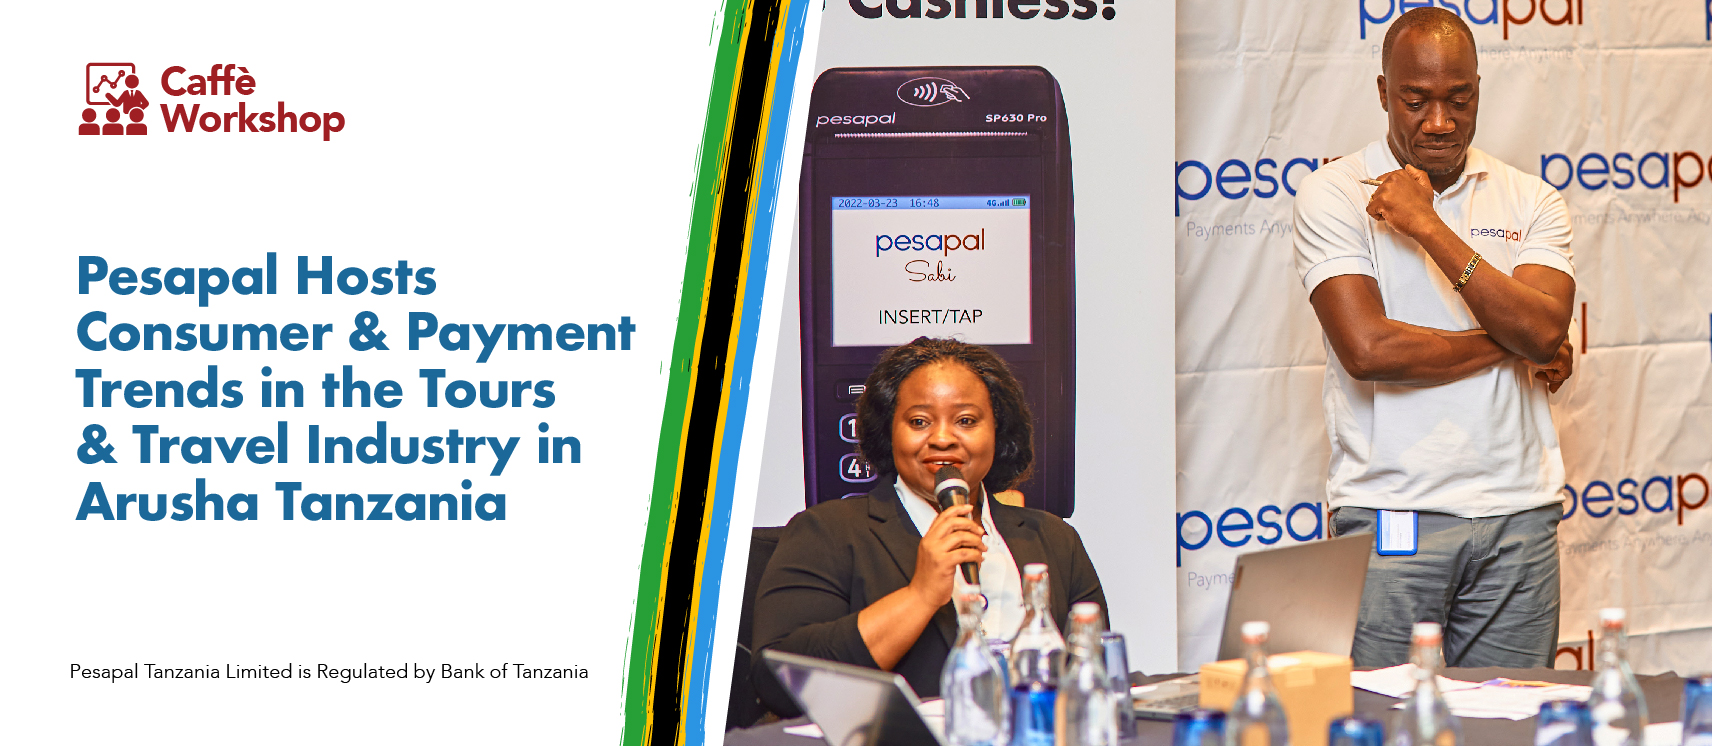 Pesapal Hosts “Consumer & Payment Trends in the Tours and Travel Industry,” Event in Arusha Tanzania.